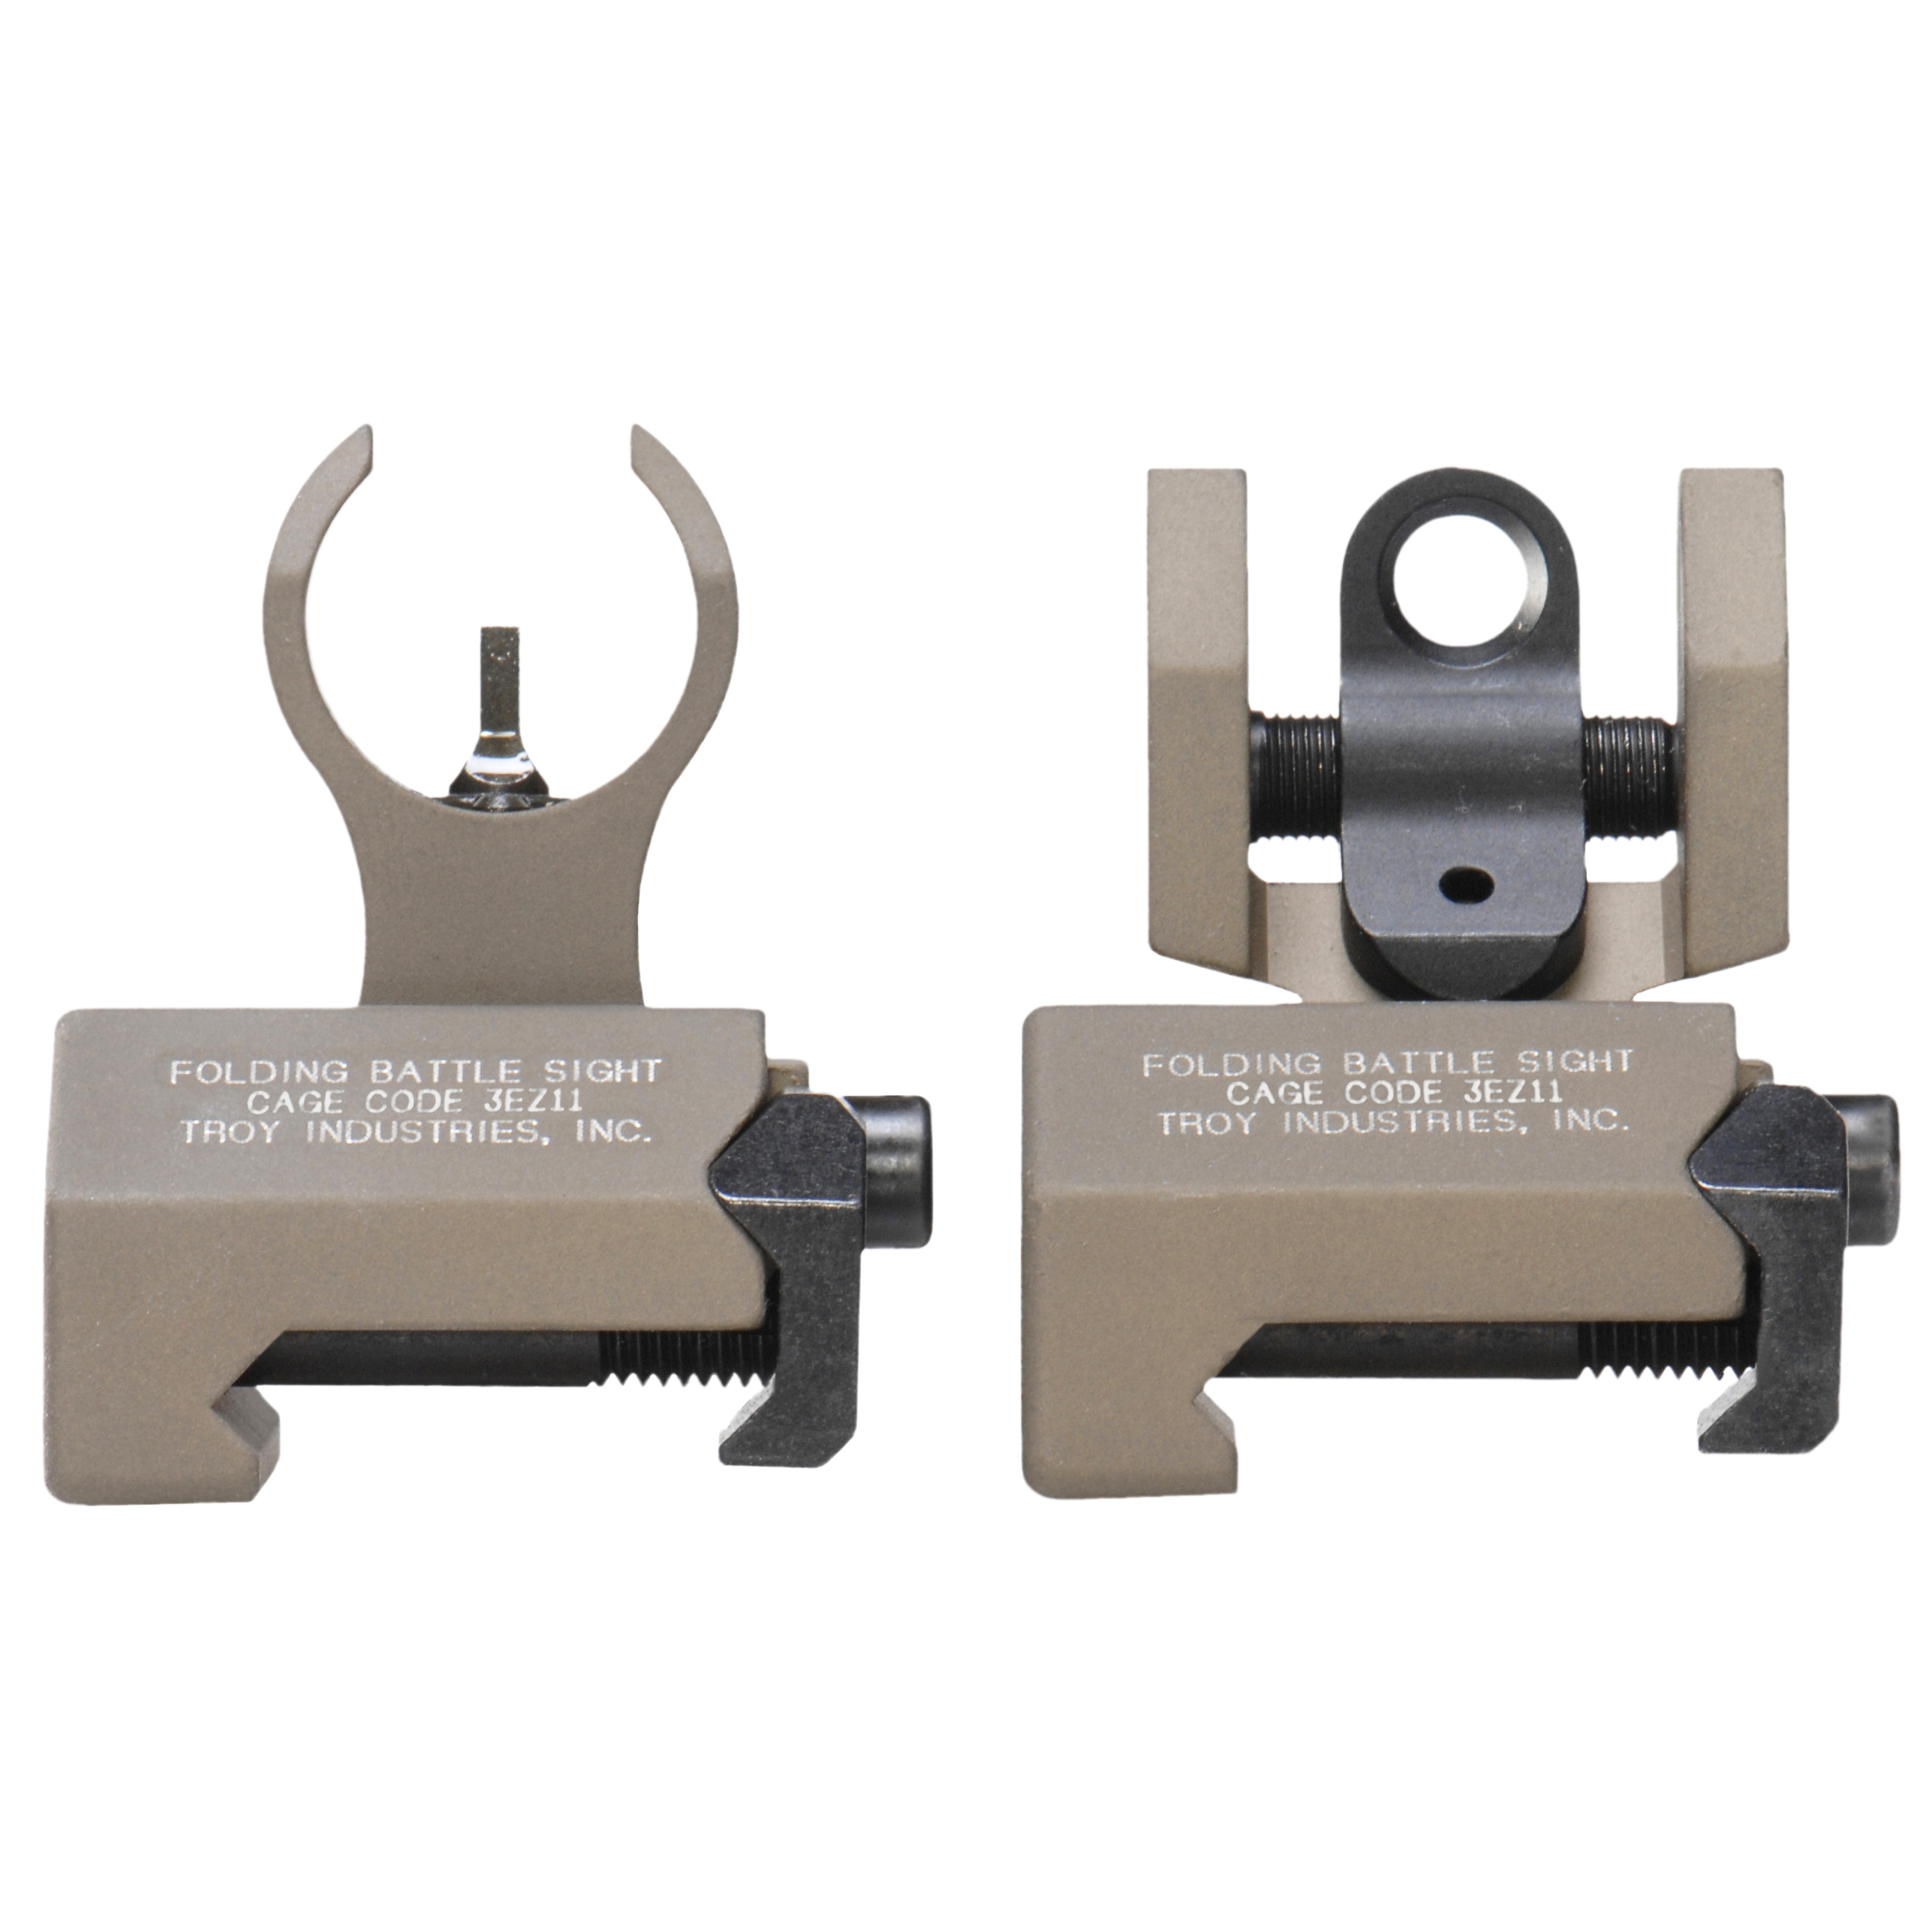 Troy Micro Set HK Top Mounted Deployable Iron Sight  Up to 15% Off 4.6  Star Rating w/ Free Shipping and Handling